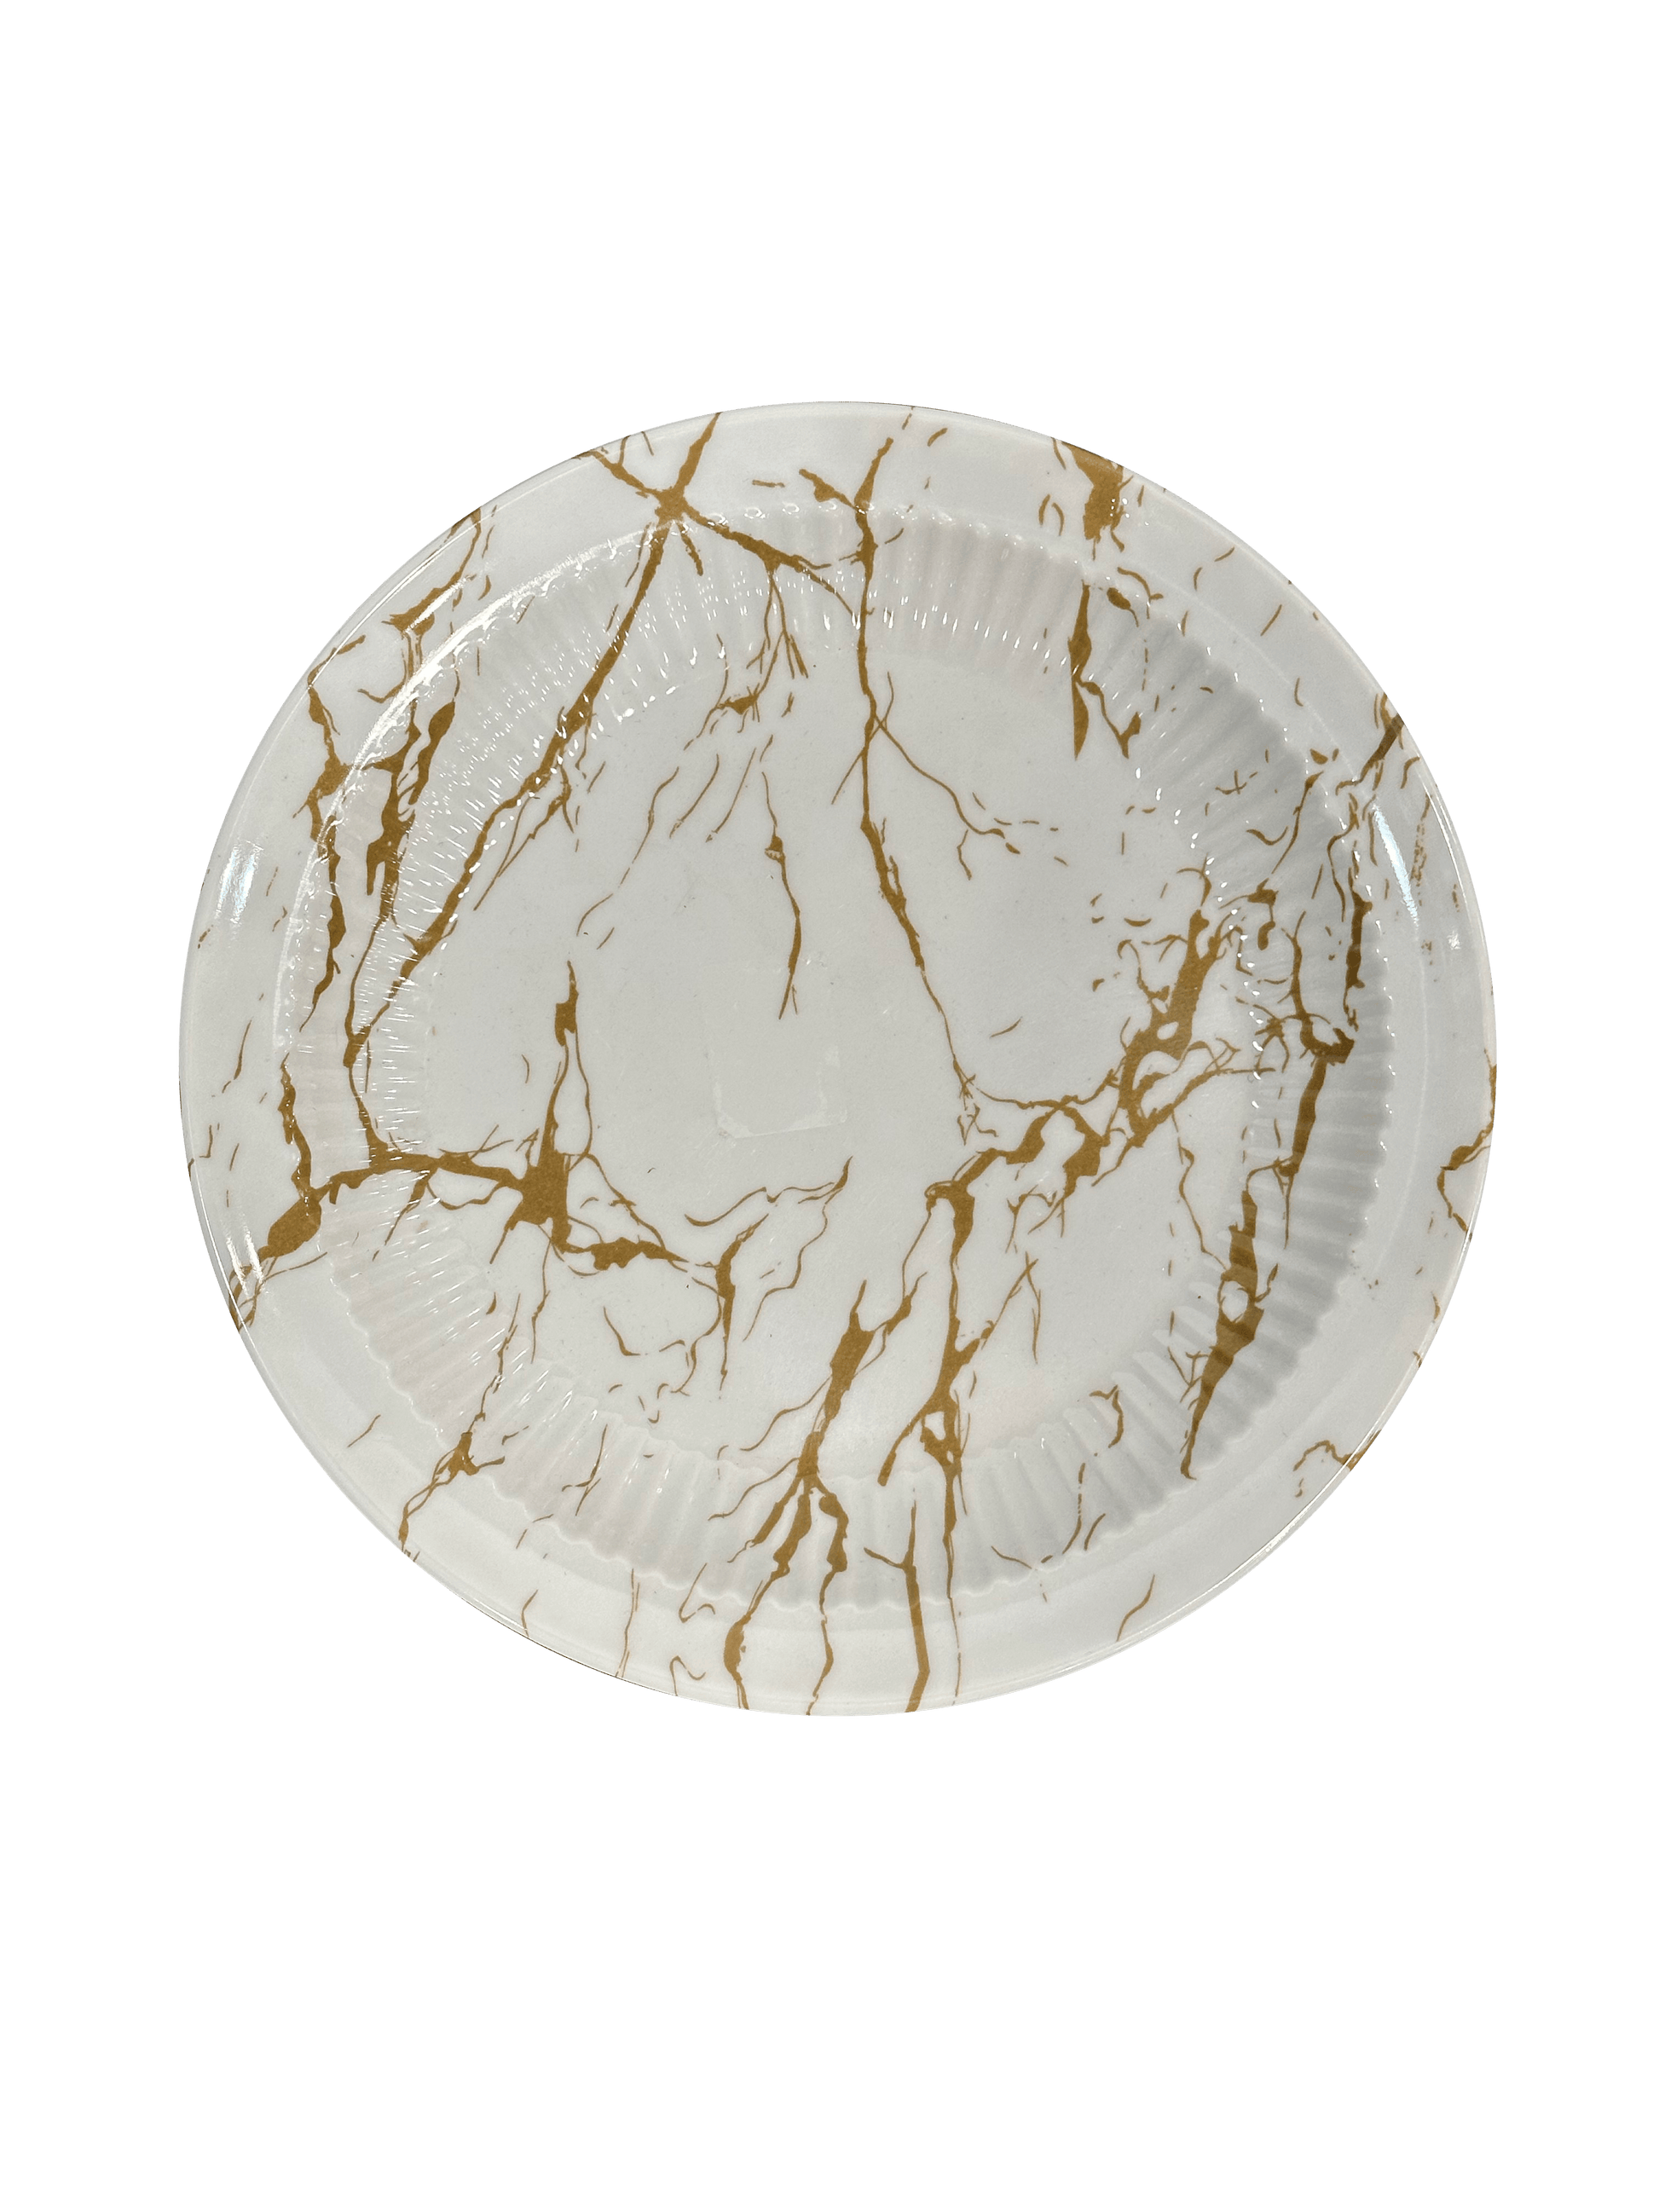 White Marble Textured Plate (6 Pcs Set) - Sunset Gifts Store